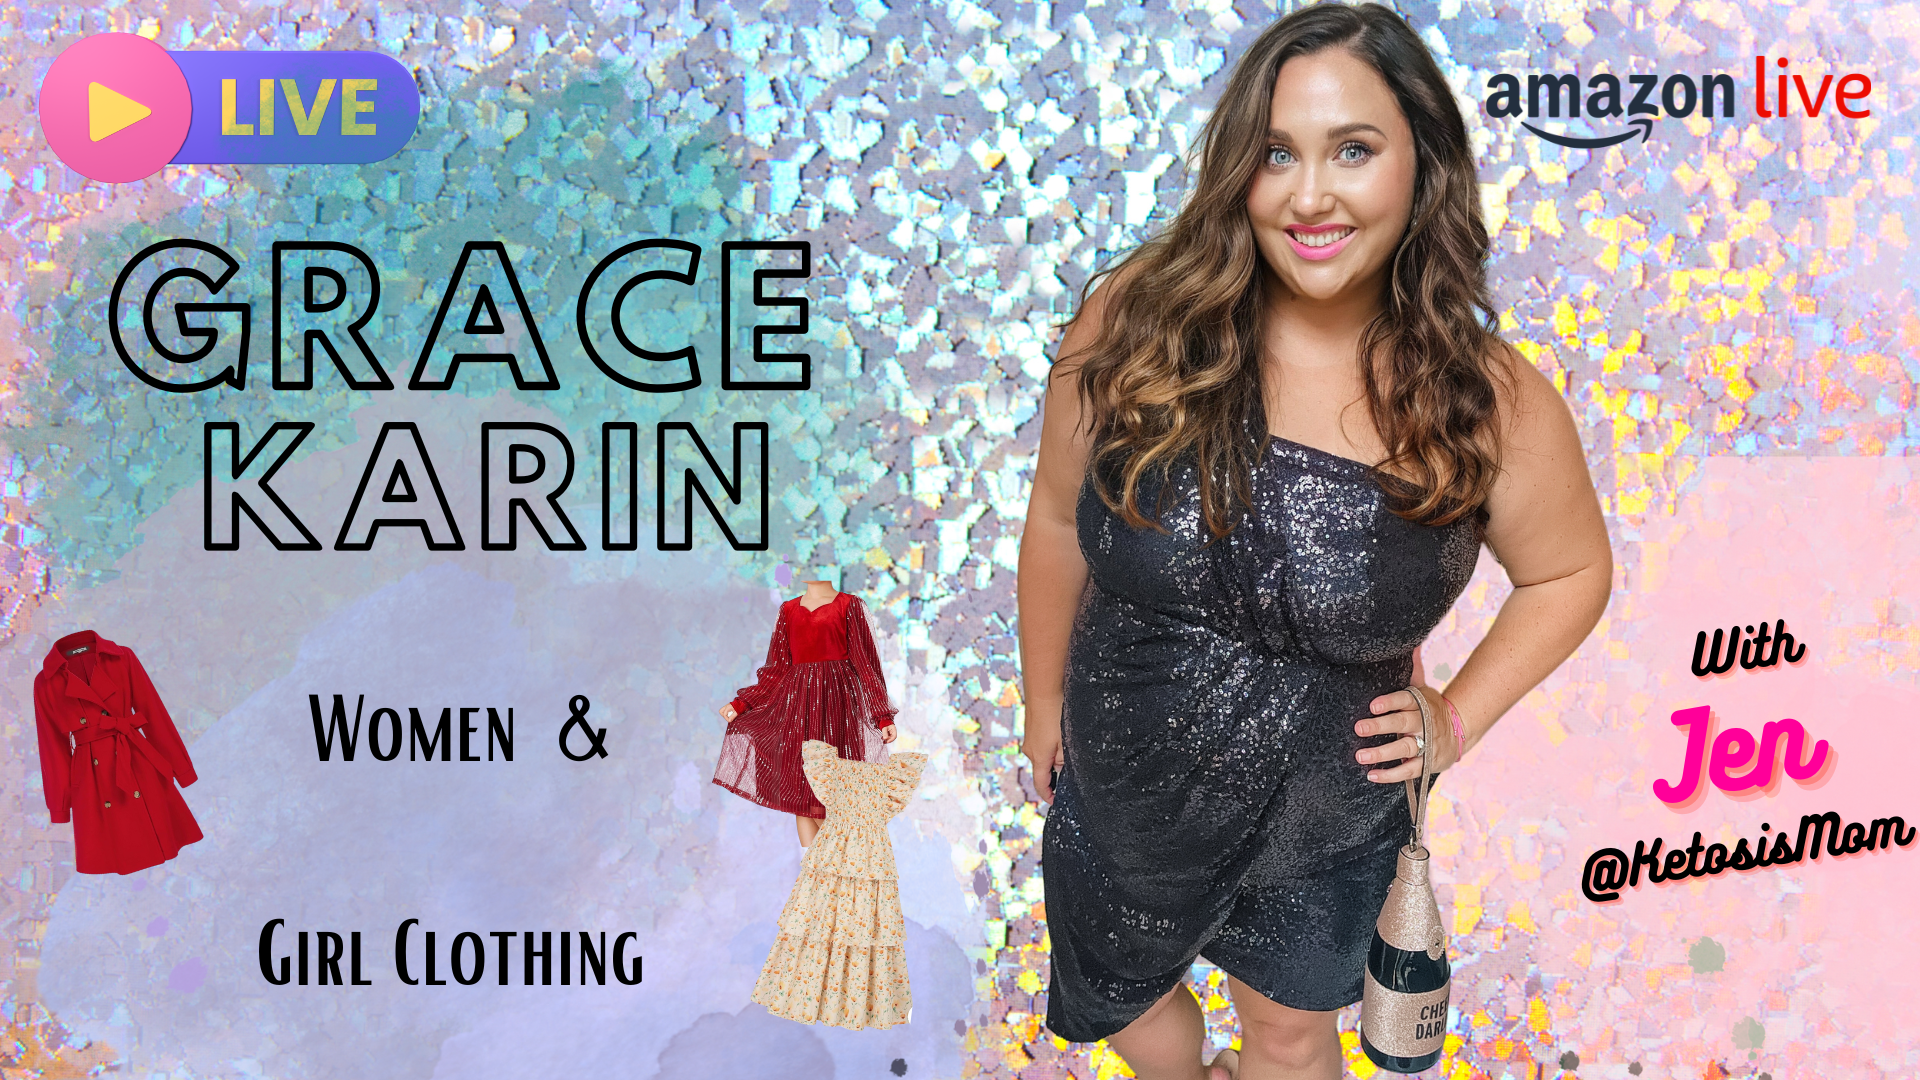 Grace Karin on Amazon for Plus size and Girls